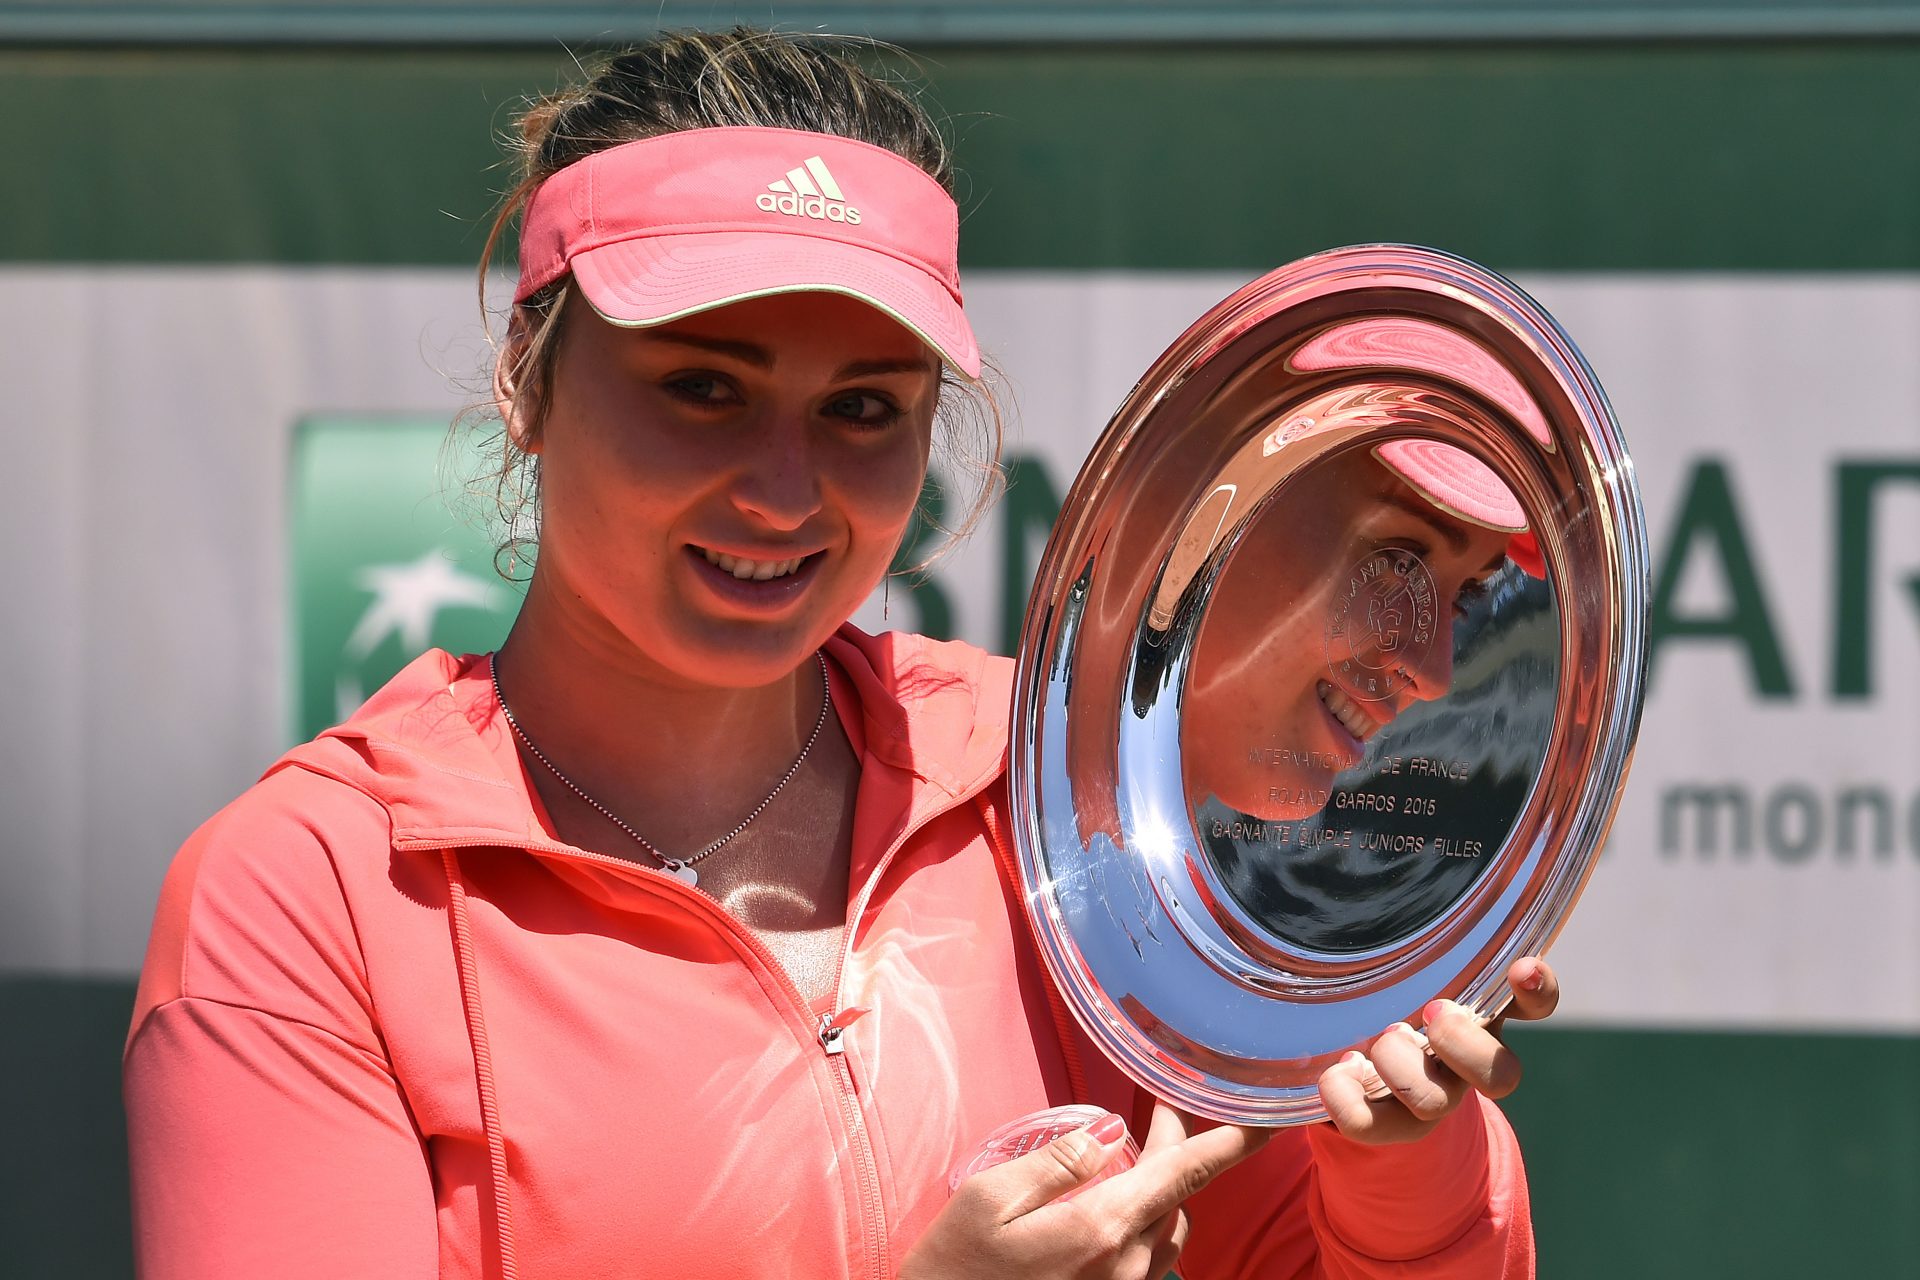 French Open Junior title